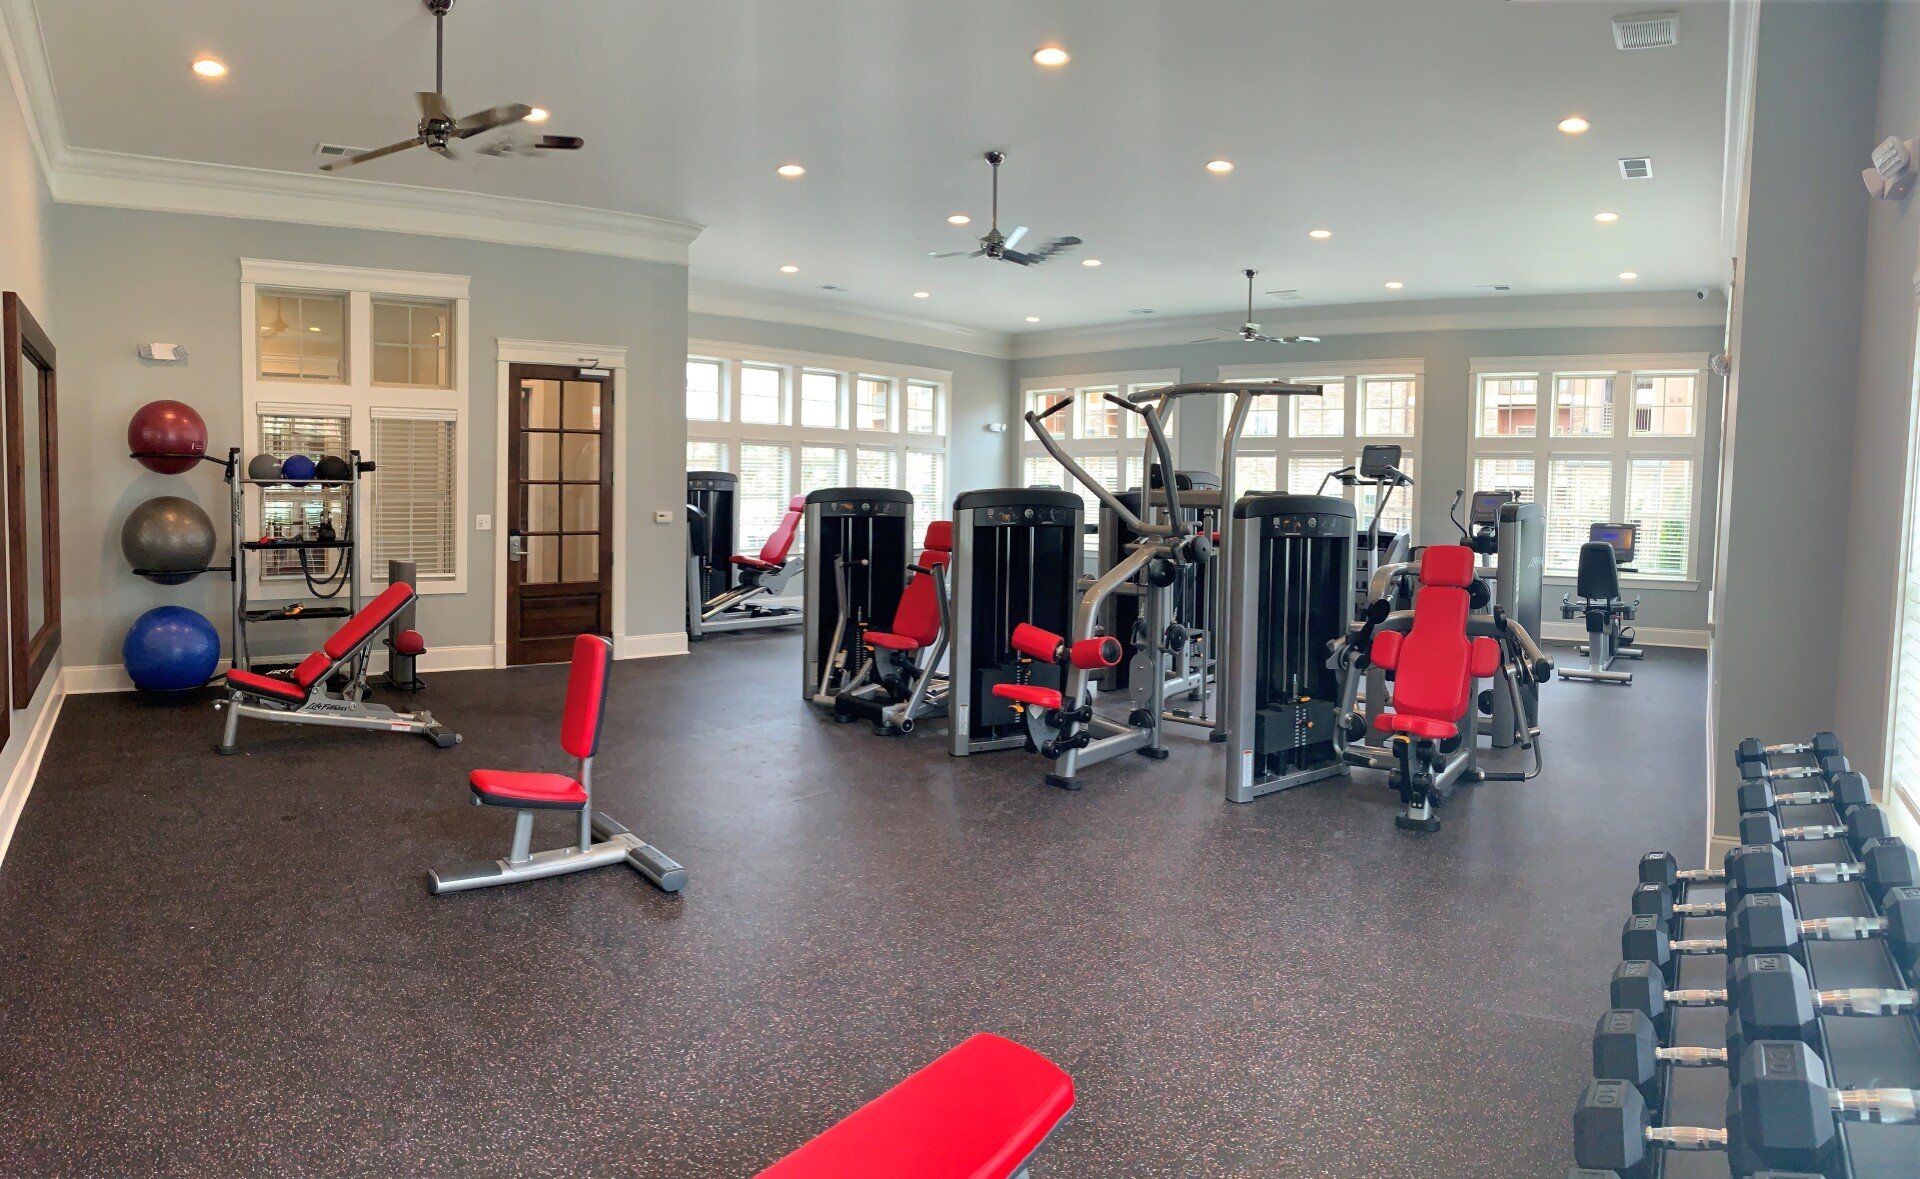 Interior of workout area